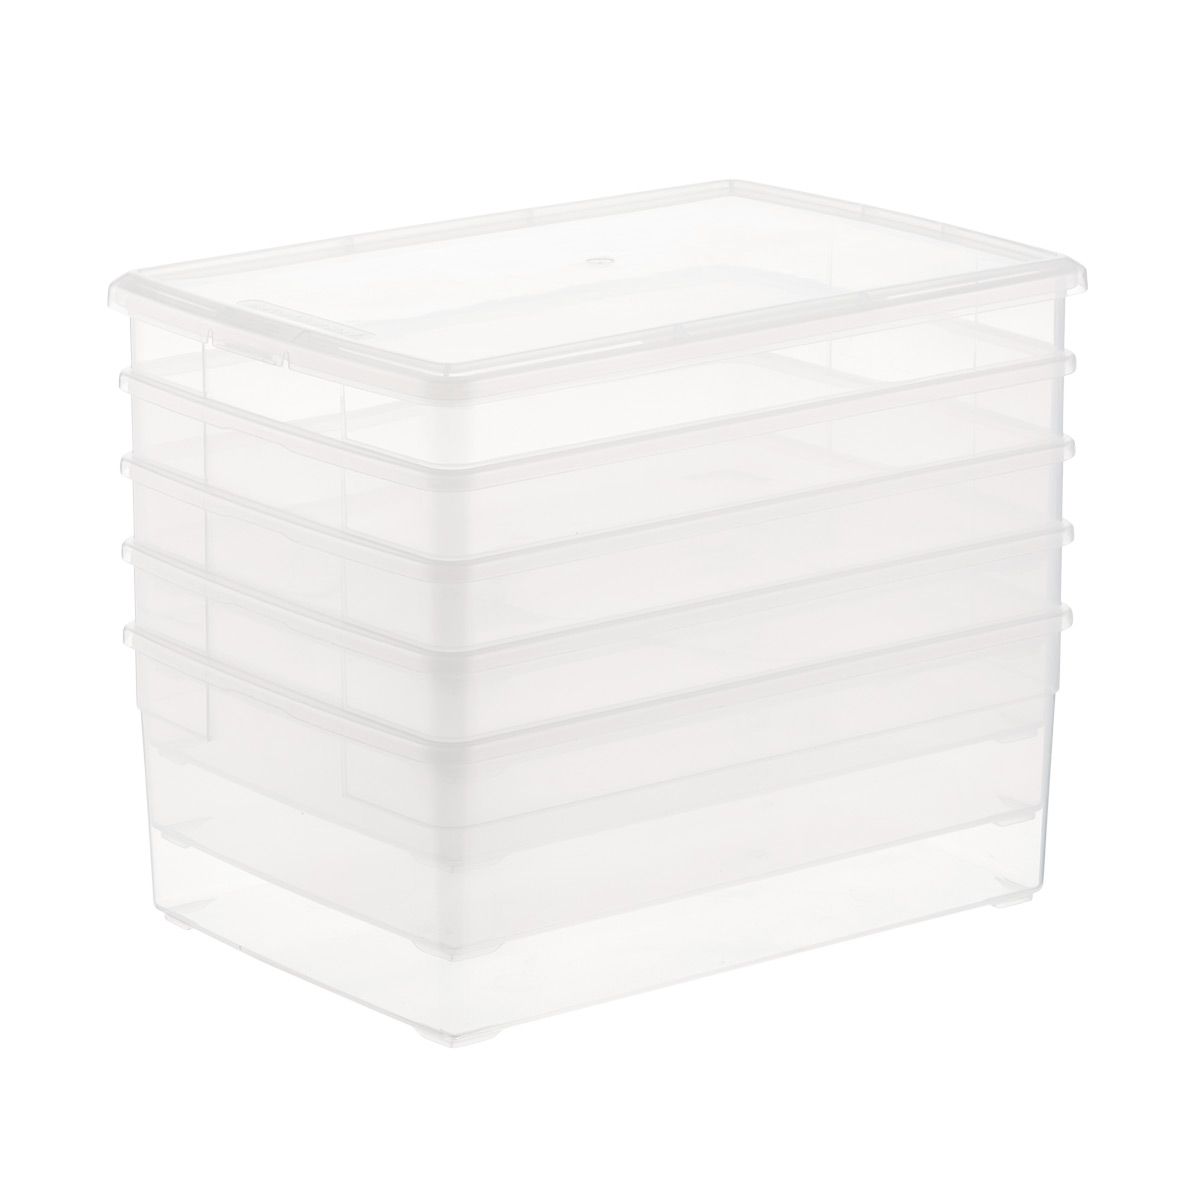 Case of 5 Our Large Shoe Box | The Container Store